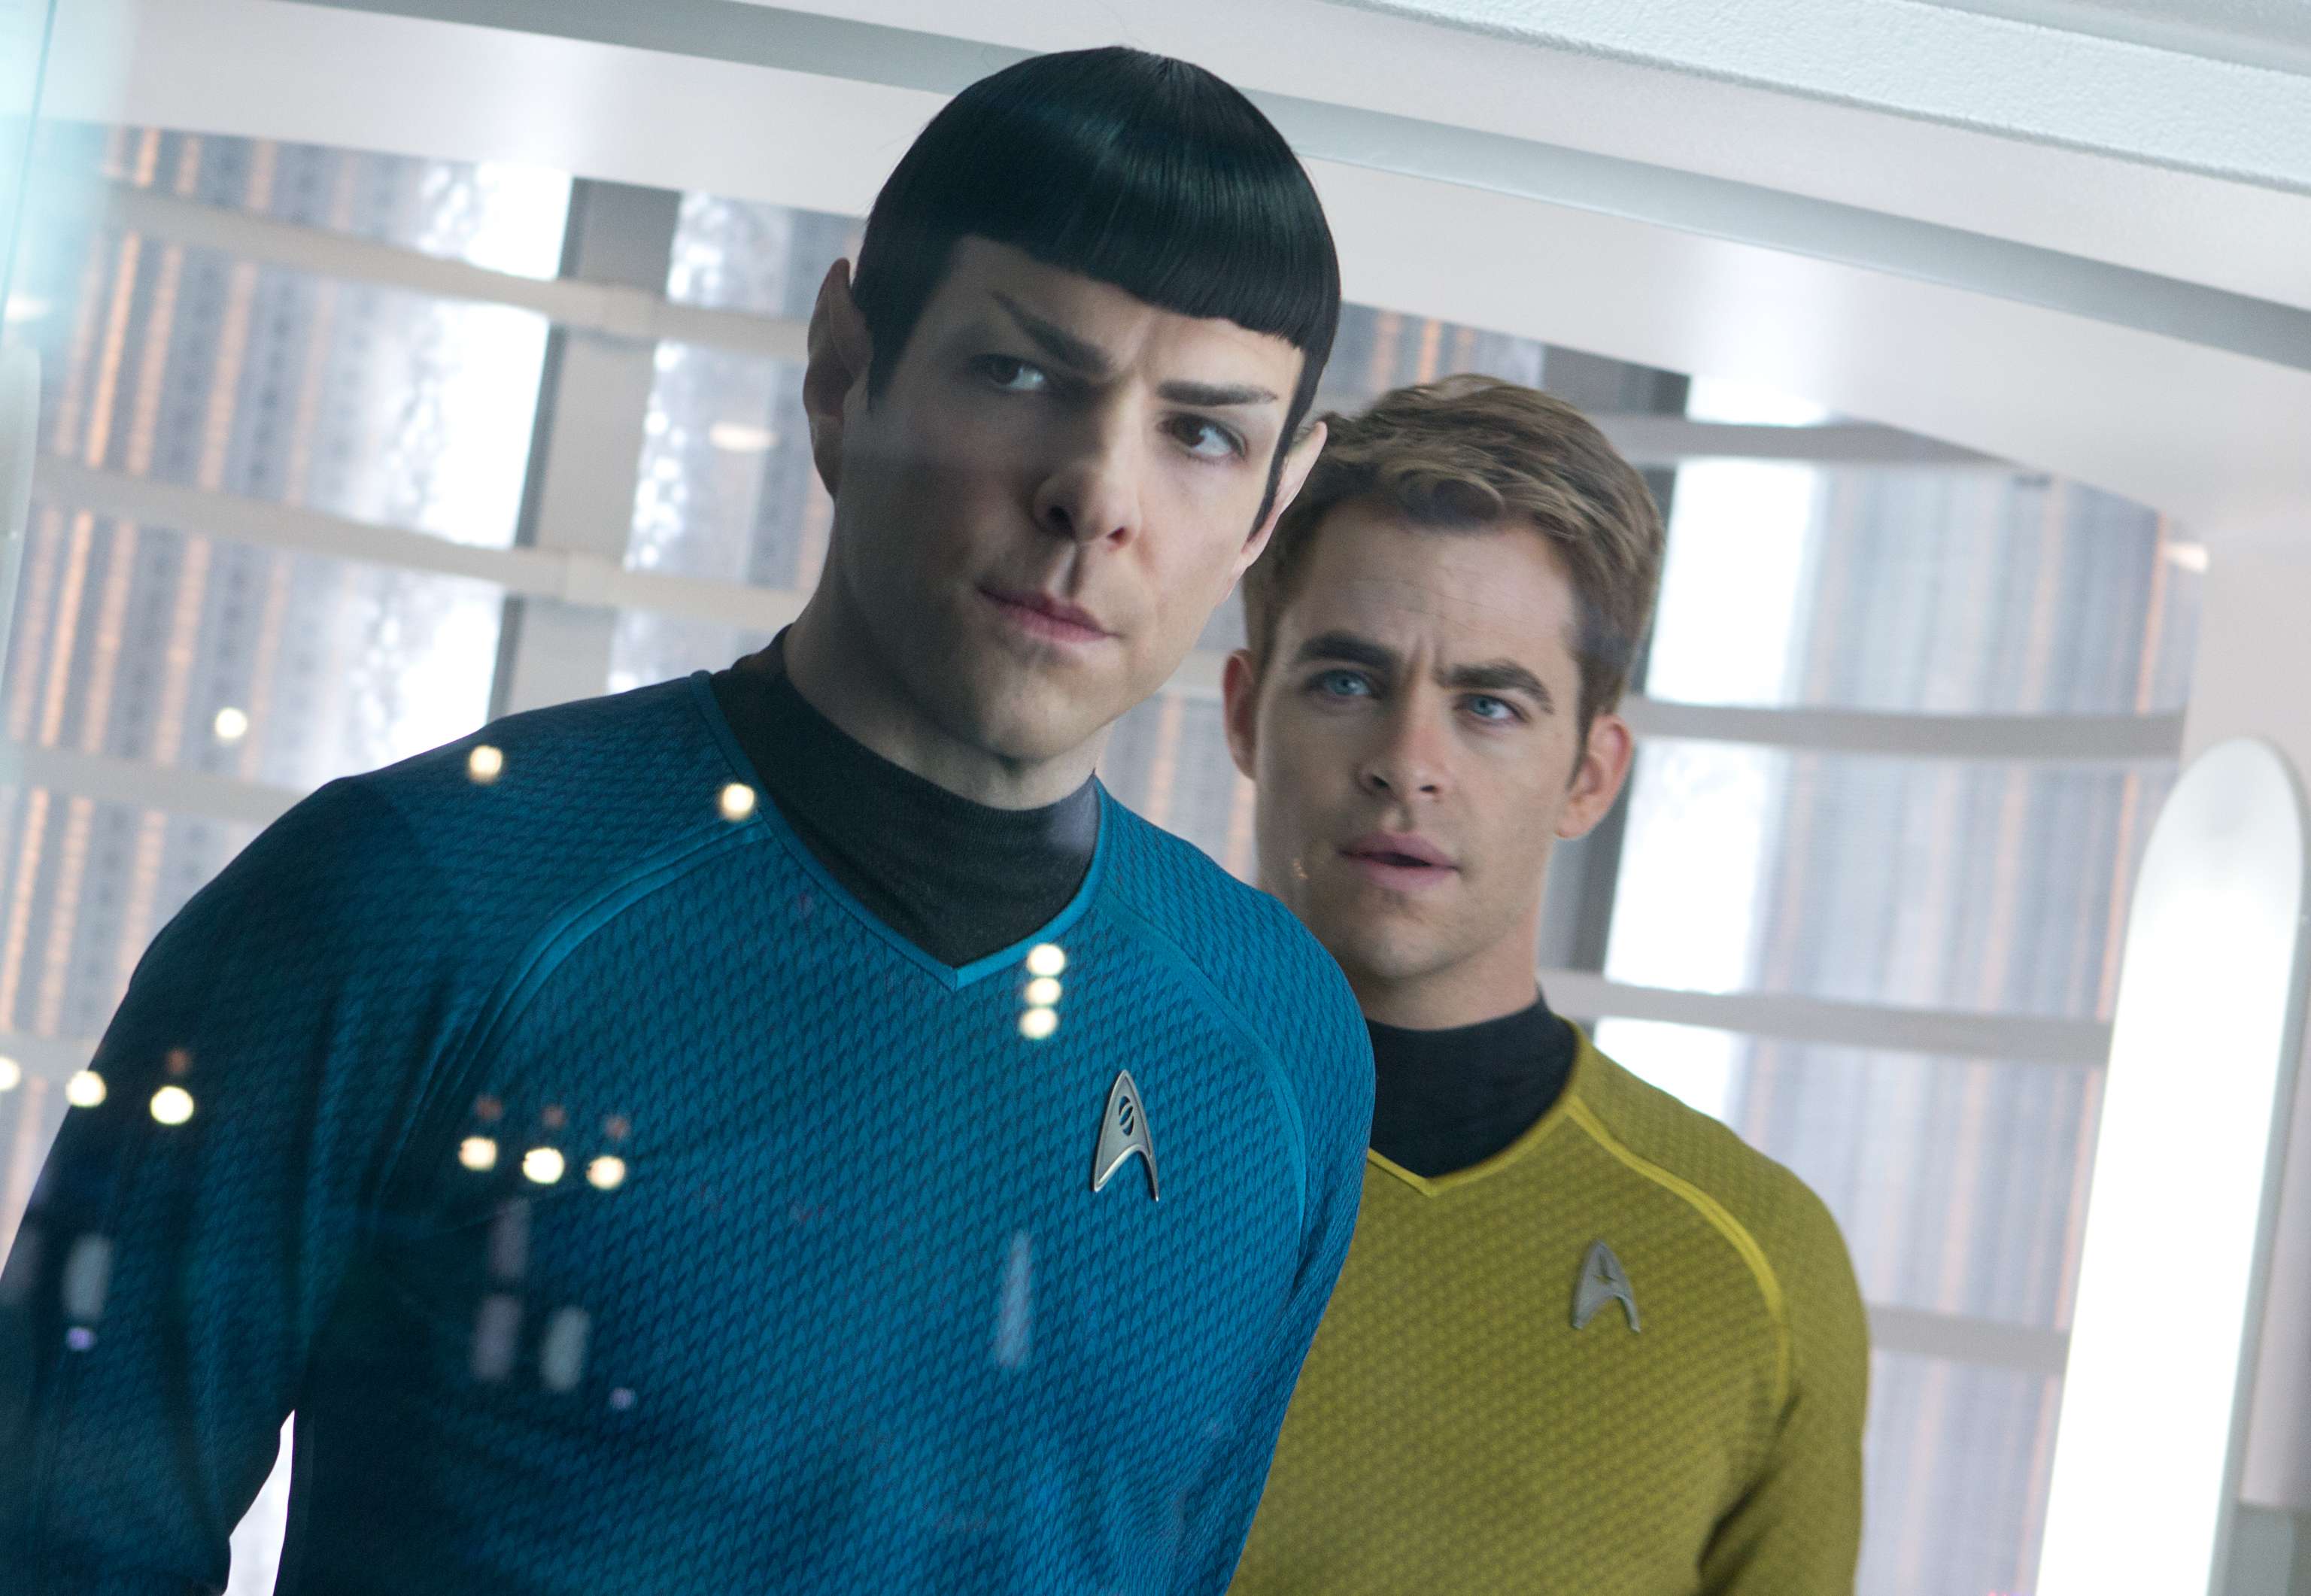 A movie still from the 2013 sci-fi action film ‘Star Trek Into Darkness’, showing Spock (left), played by Zachary Quinto, and Captain James T. Kirk, played by Chris Pine.